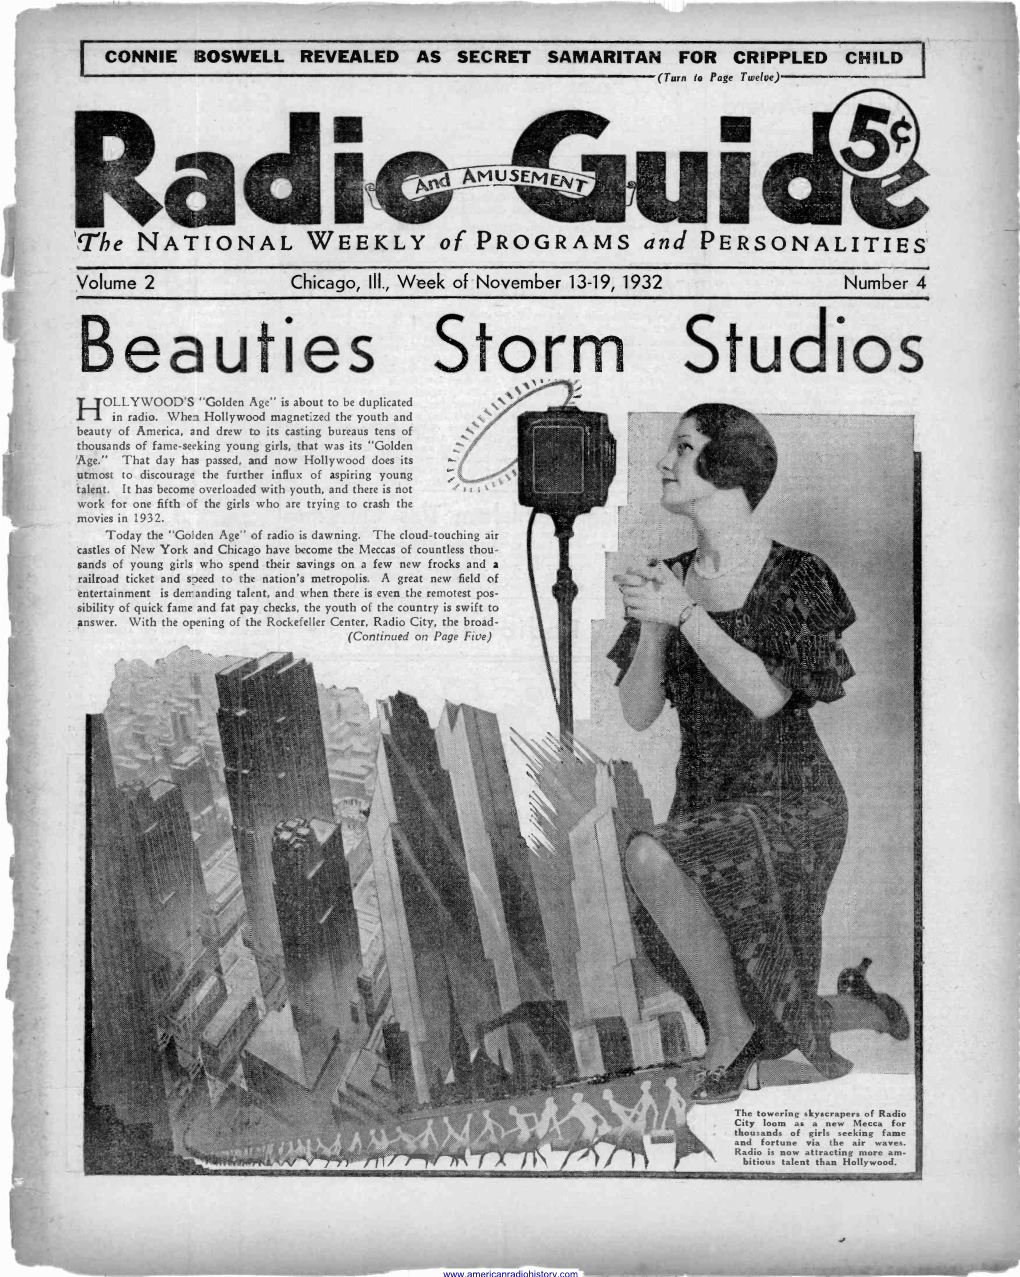 19, 1932 Number 4 Beauties Storm Stu 5 HOLLYWOOD's "Golden Age" Is About to Be Duplicated in Radio